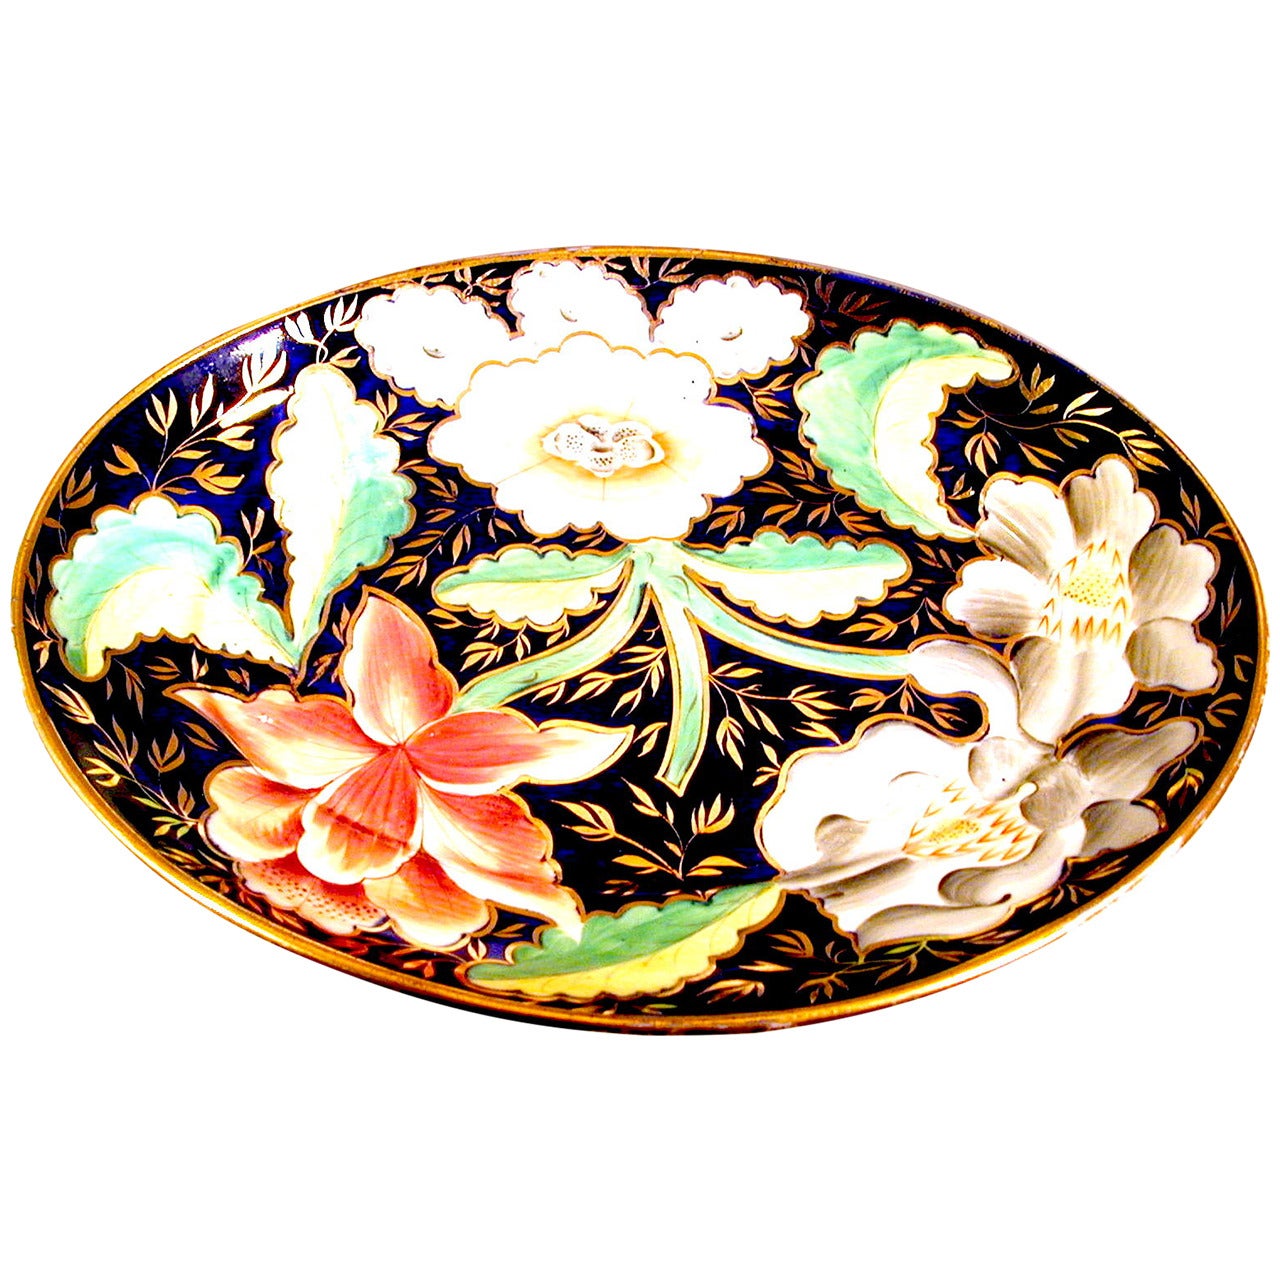 Antique Newhall Porcelain Dish For Sale